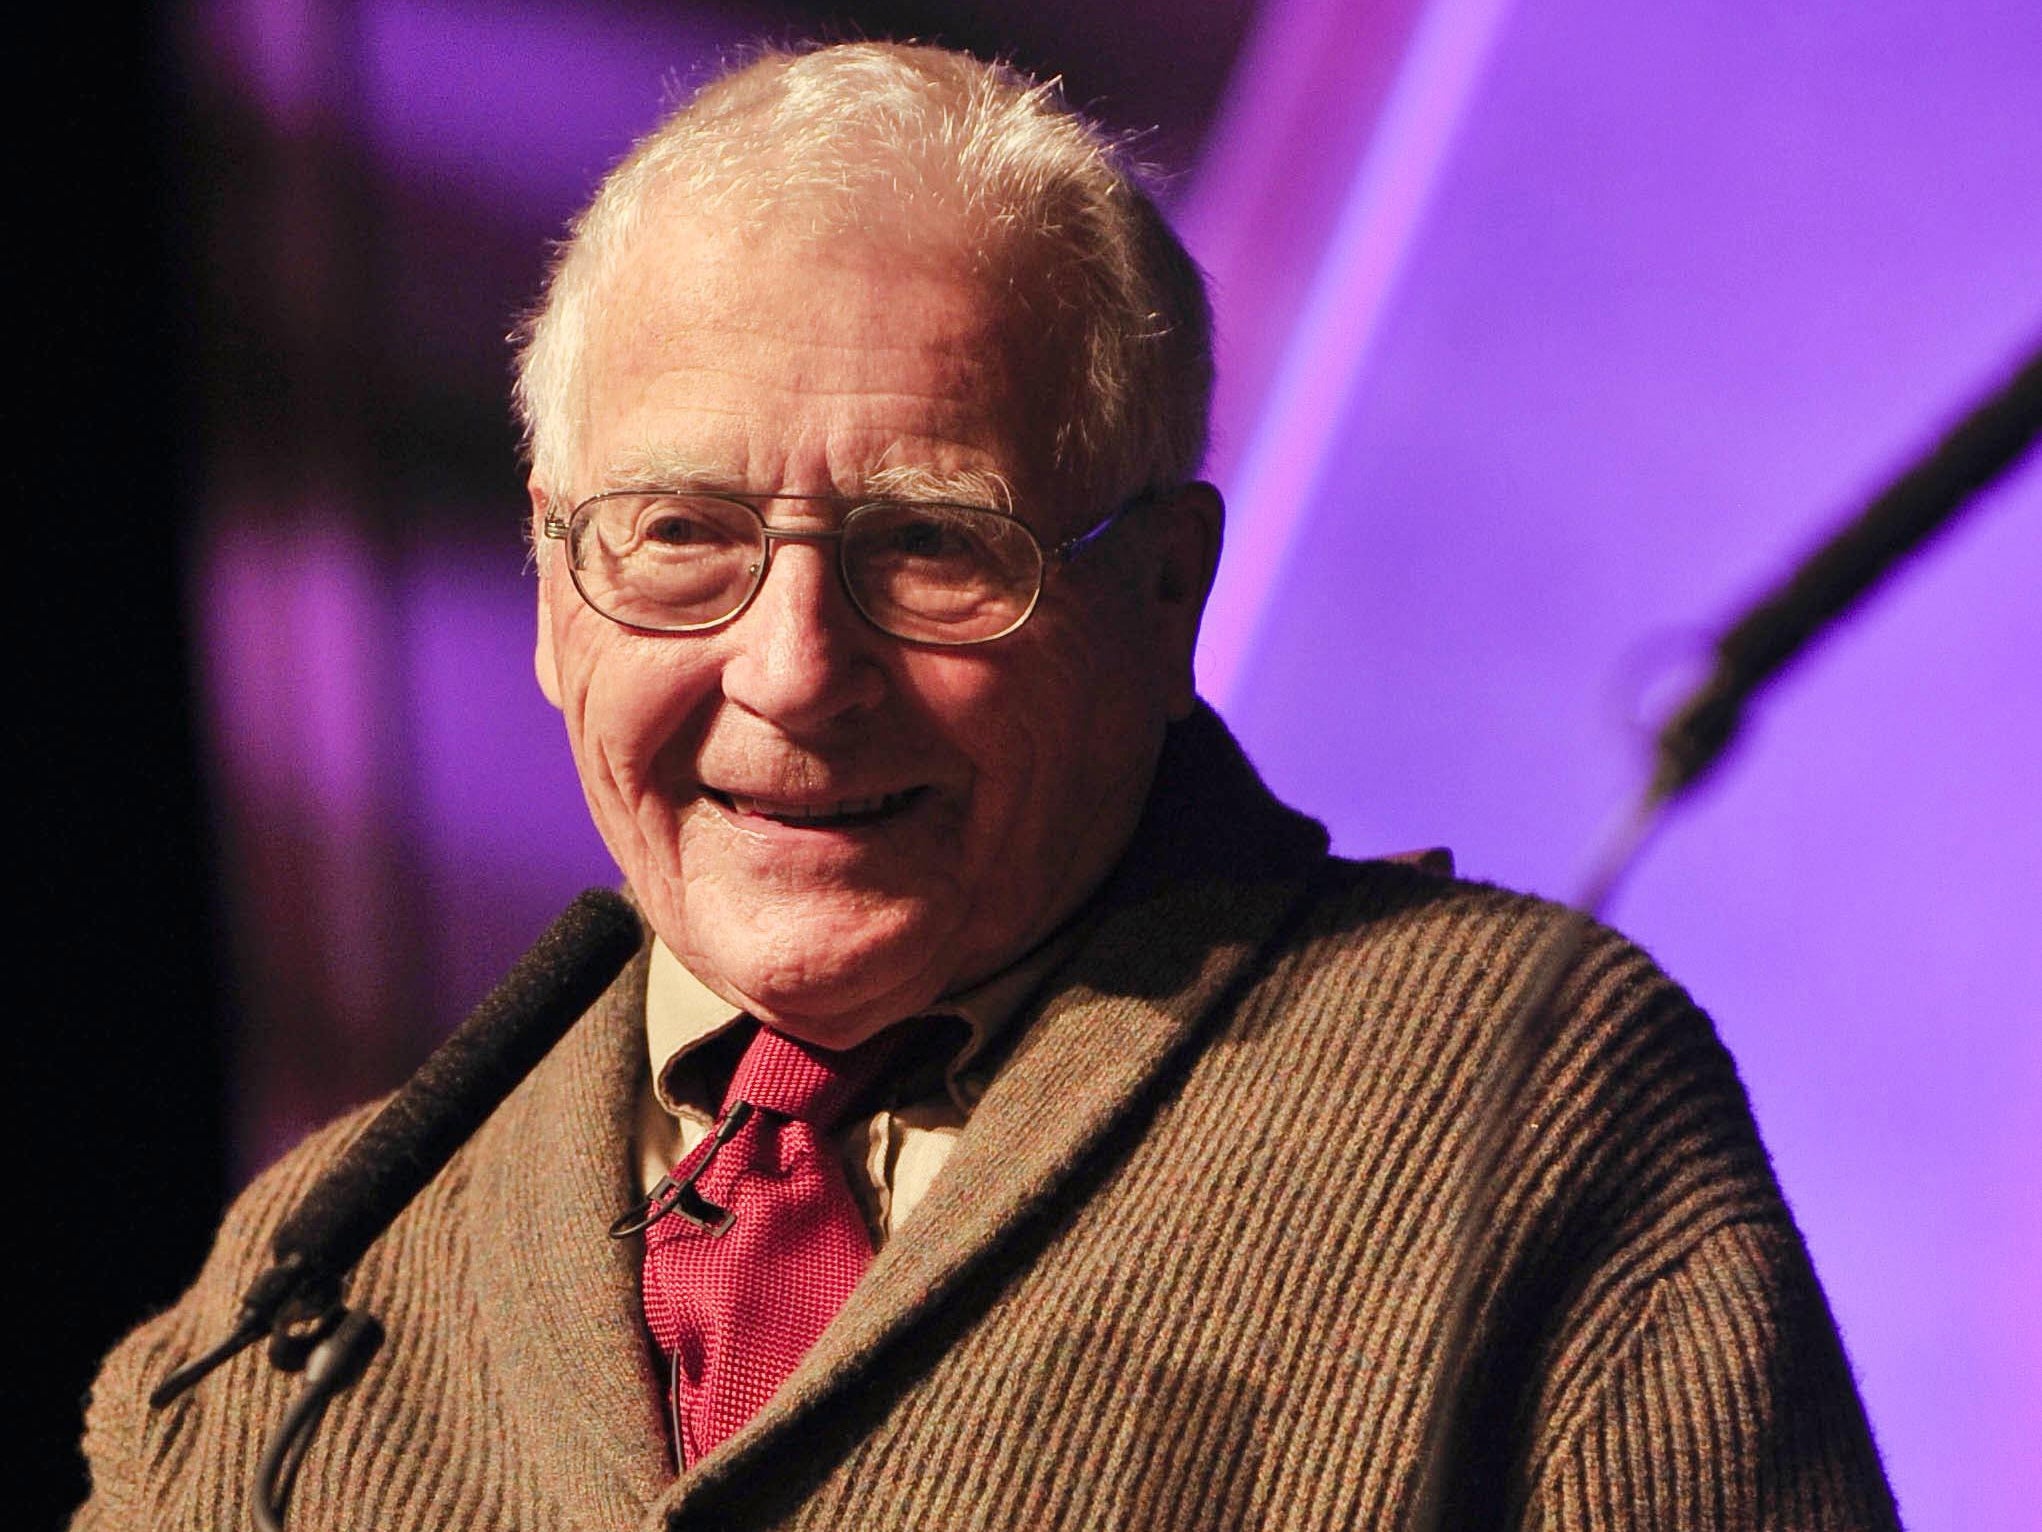 James Lovelock at the tender age of 90 at the Hay Festival in 2010